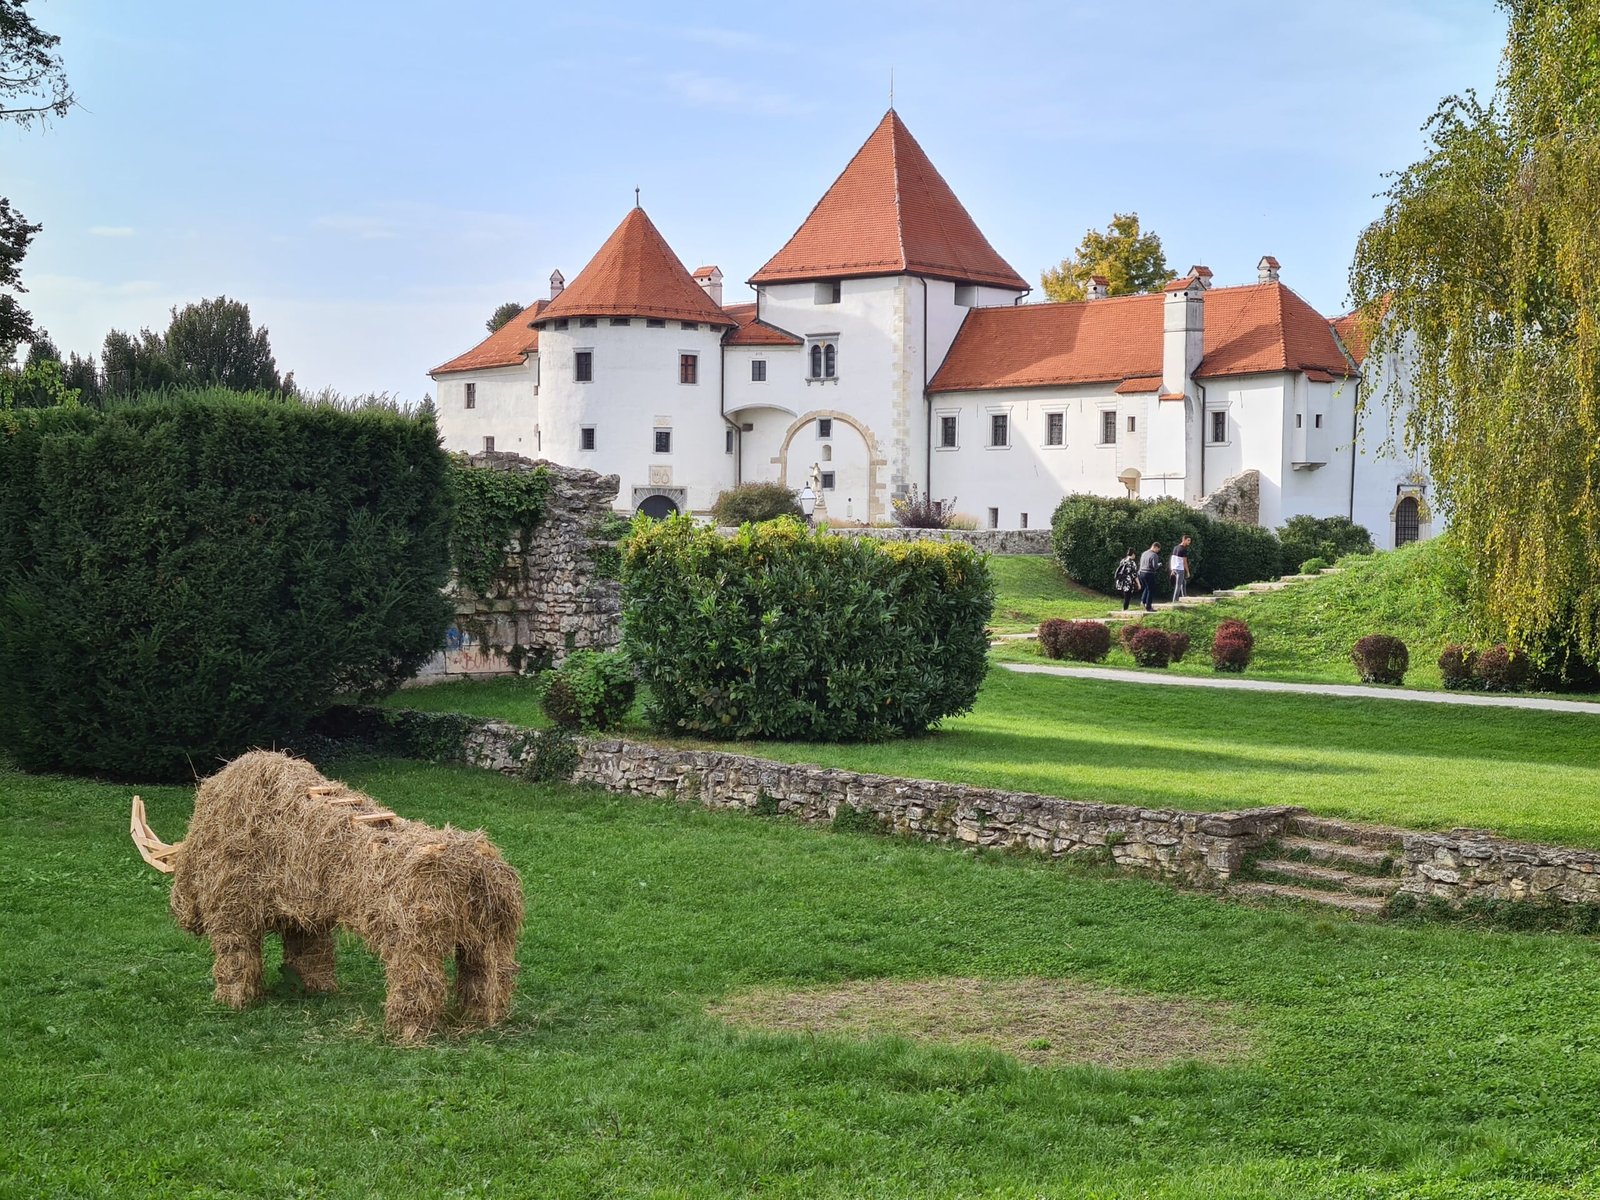 What to see in Zagreb - Varaždin